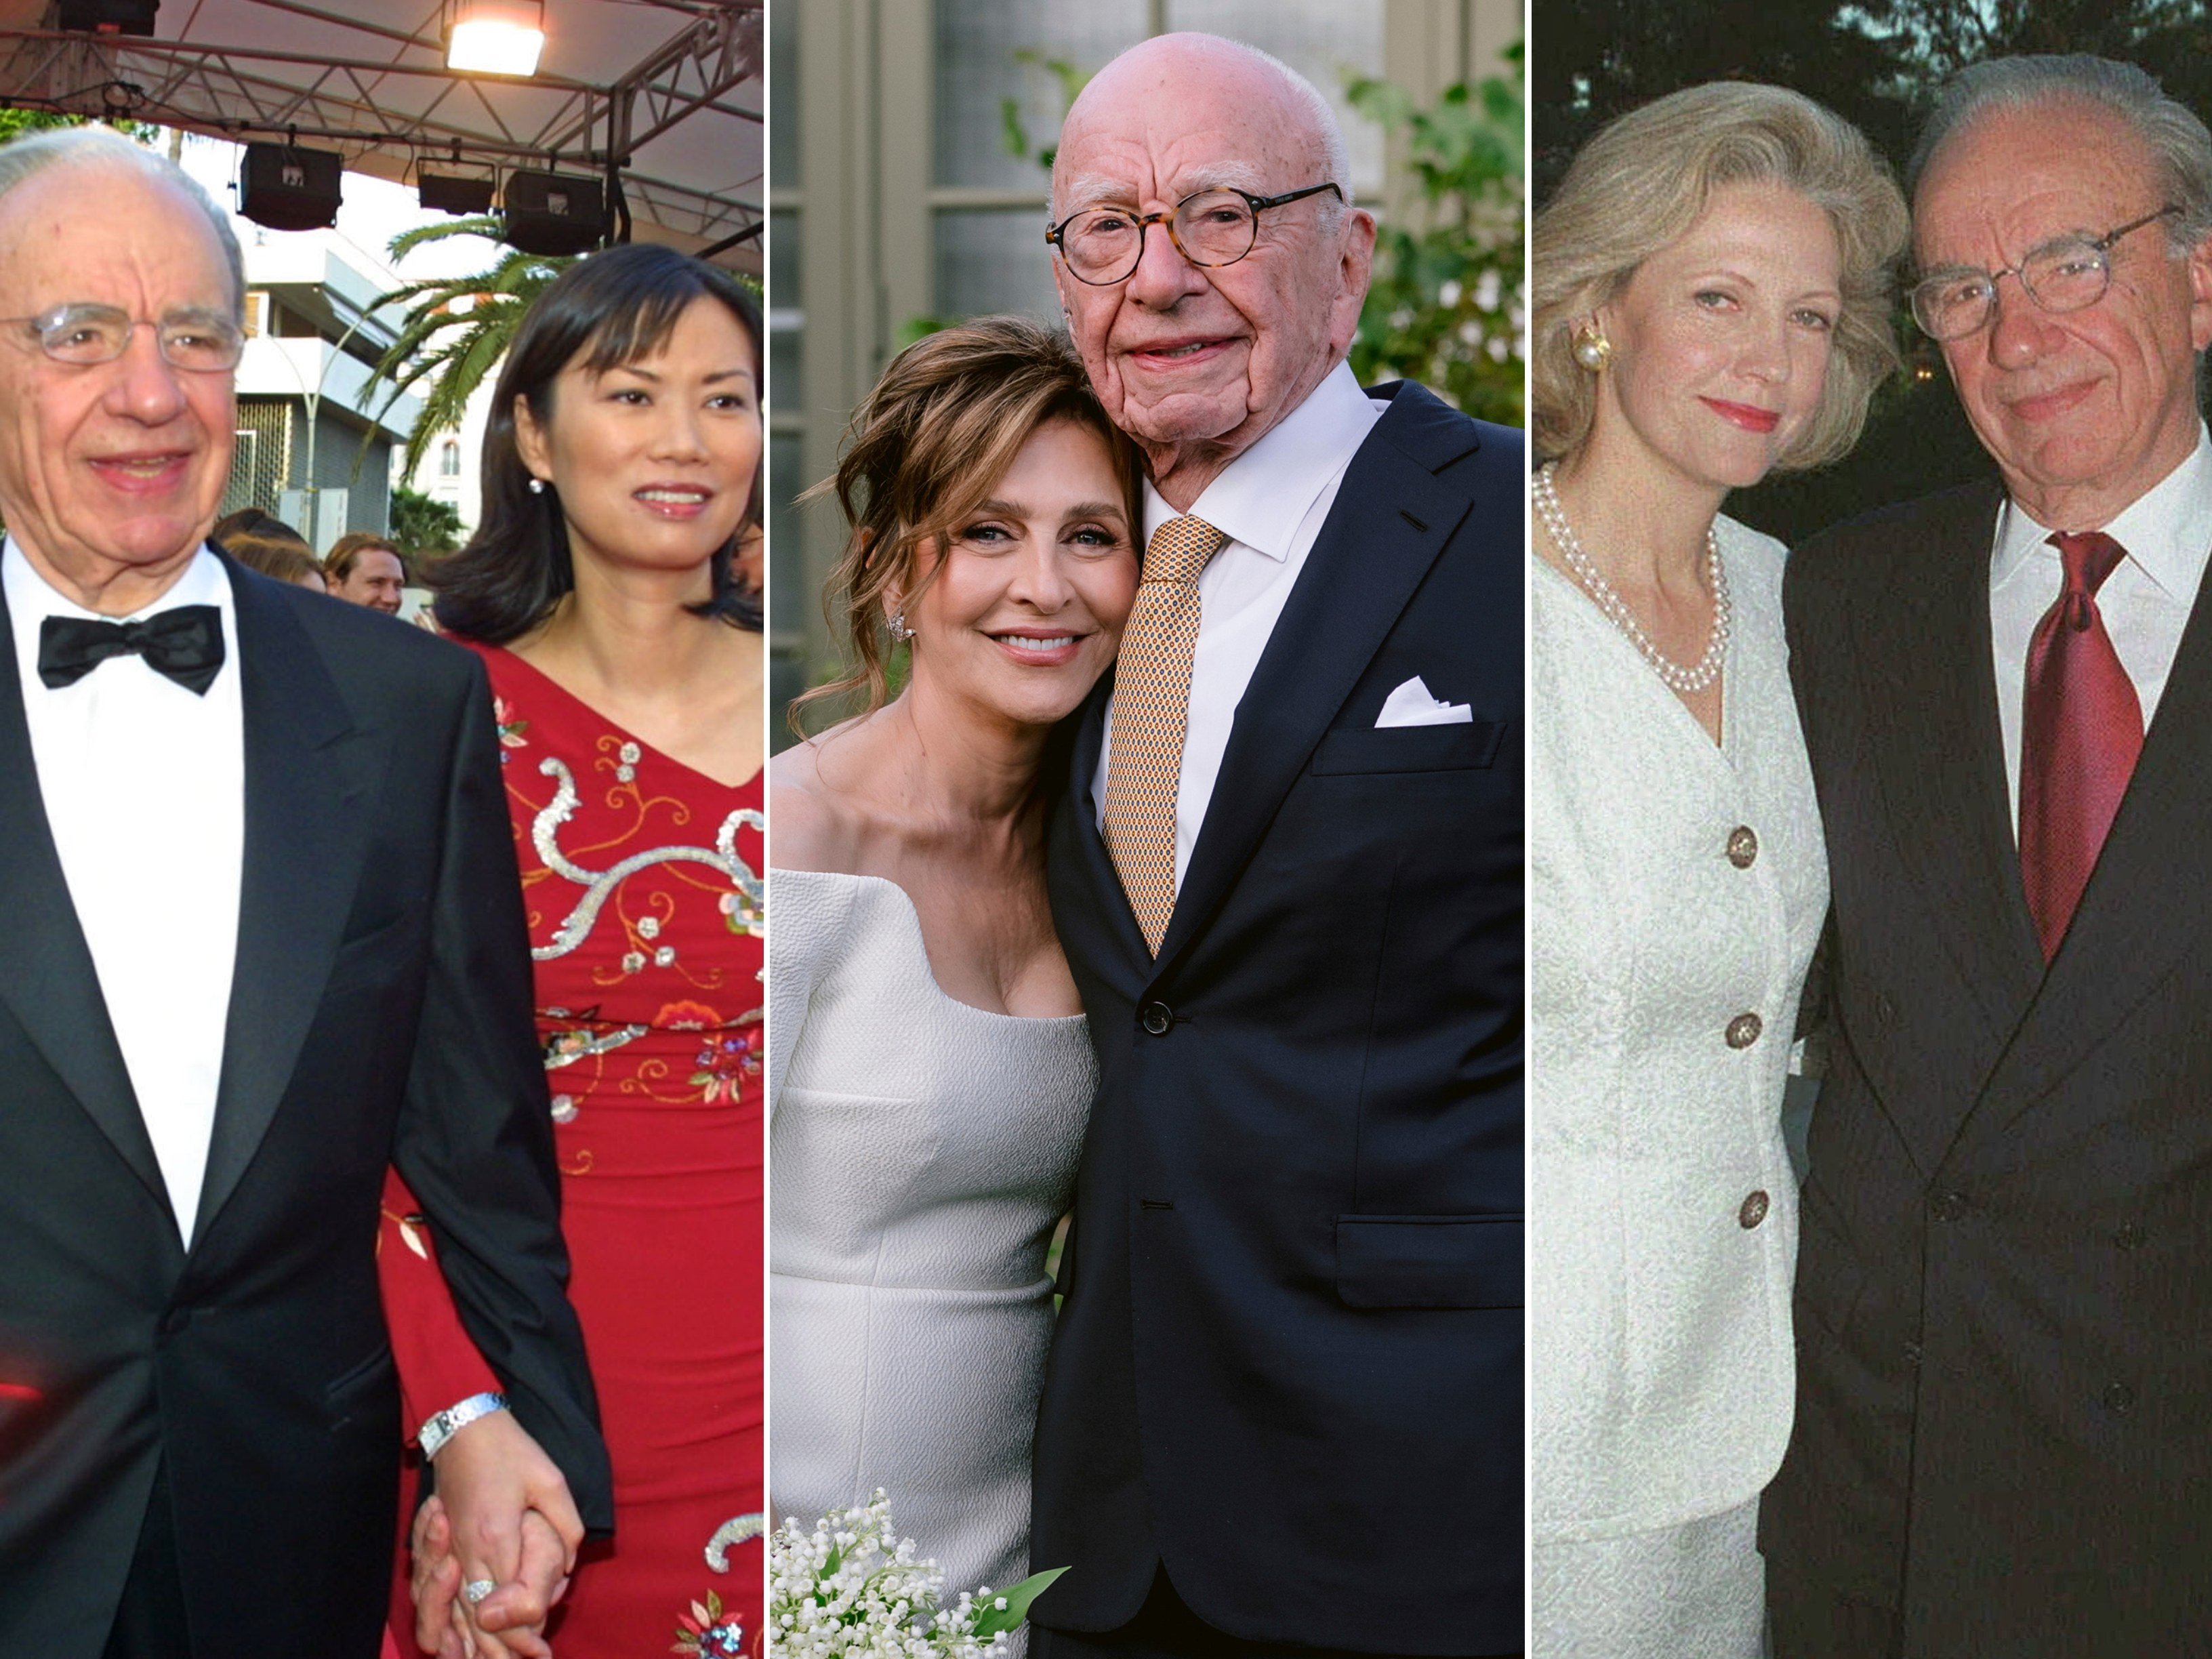 Rupert Murdoch has been married five times over the years, including to Wendy Deng, his current wife Elena Zhukova, and Anna Murdoch Mann. Photo: AP, AFP